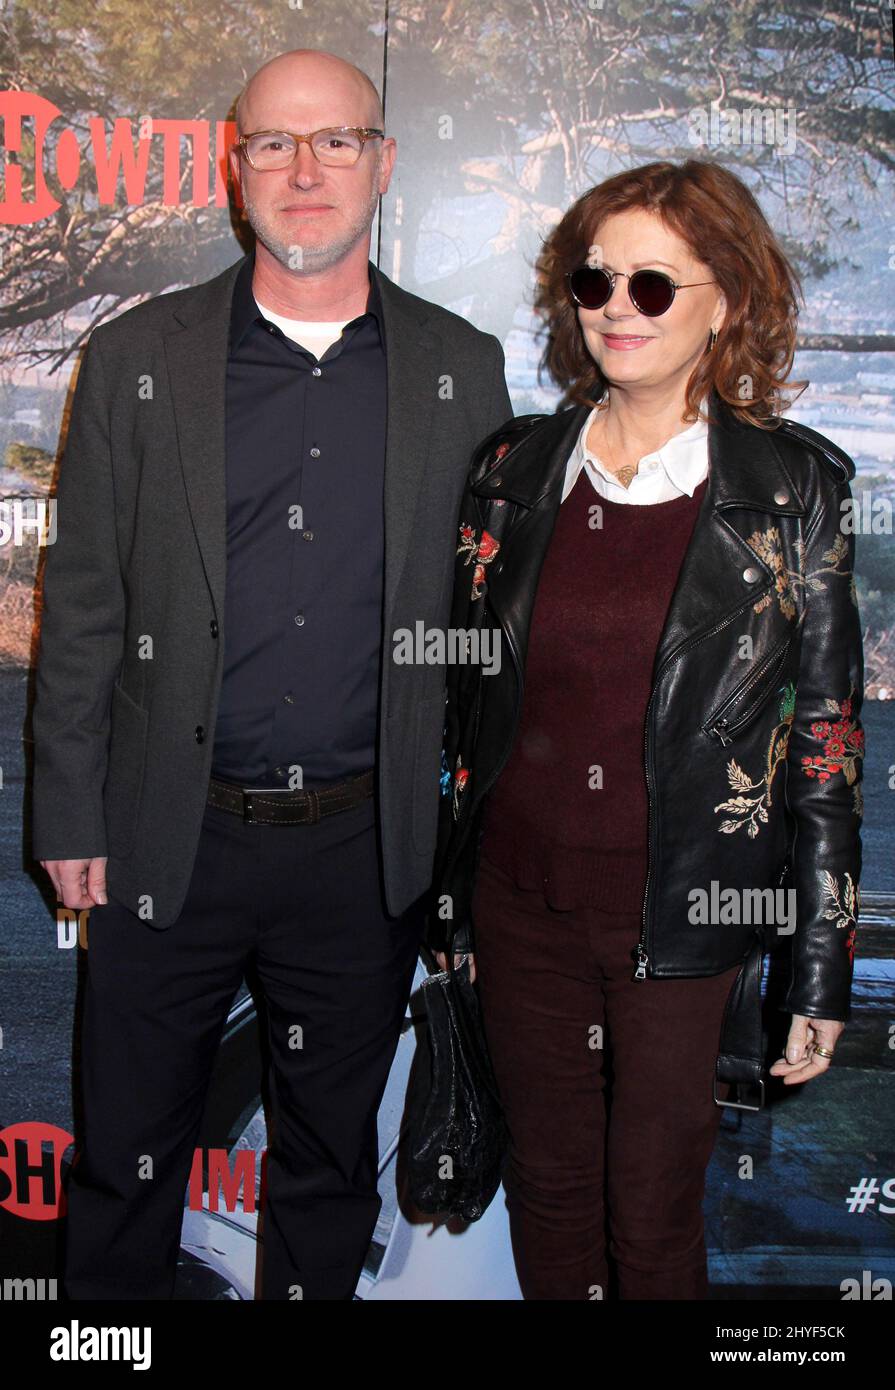 David Hollander & Susan Sarandon arriving for the 'Ray Donovan' For Your Consideration Red Carpet Event Held at the New Museum, New York on April 18, 2018 Stock Photo